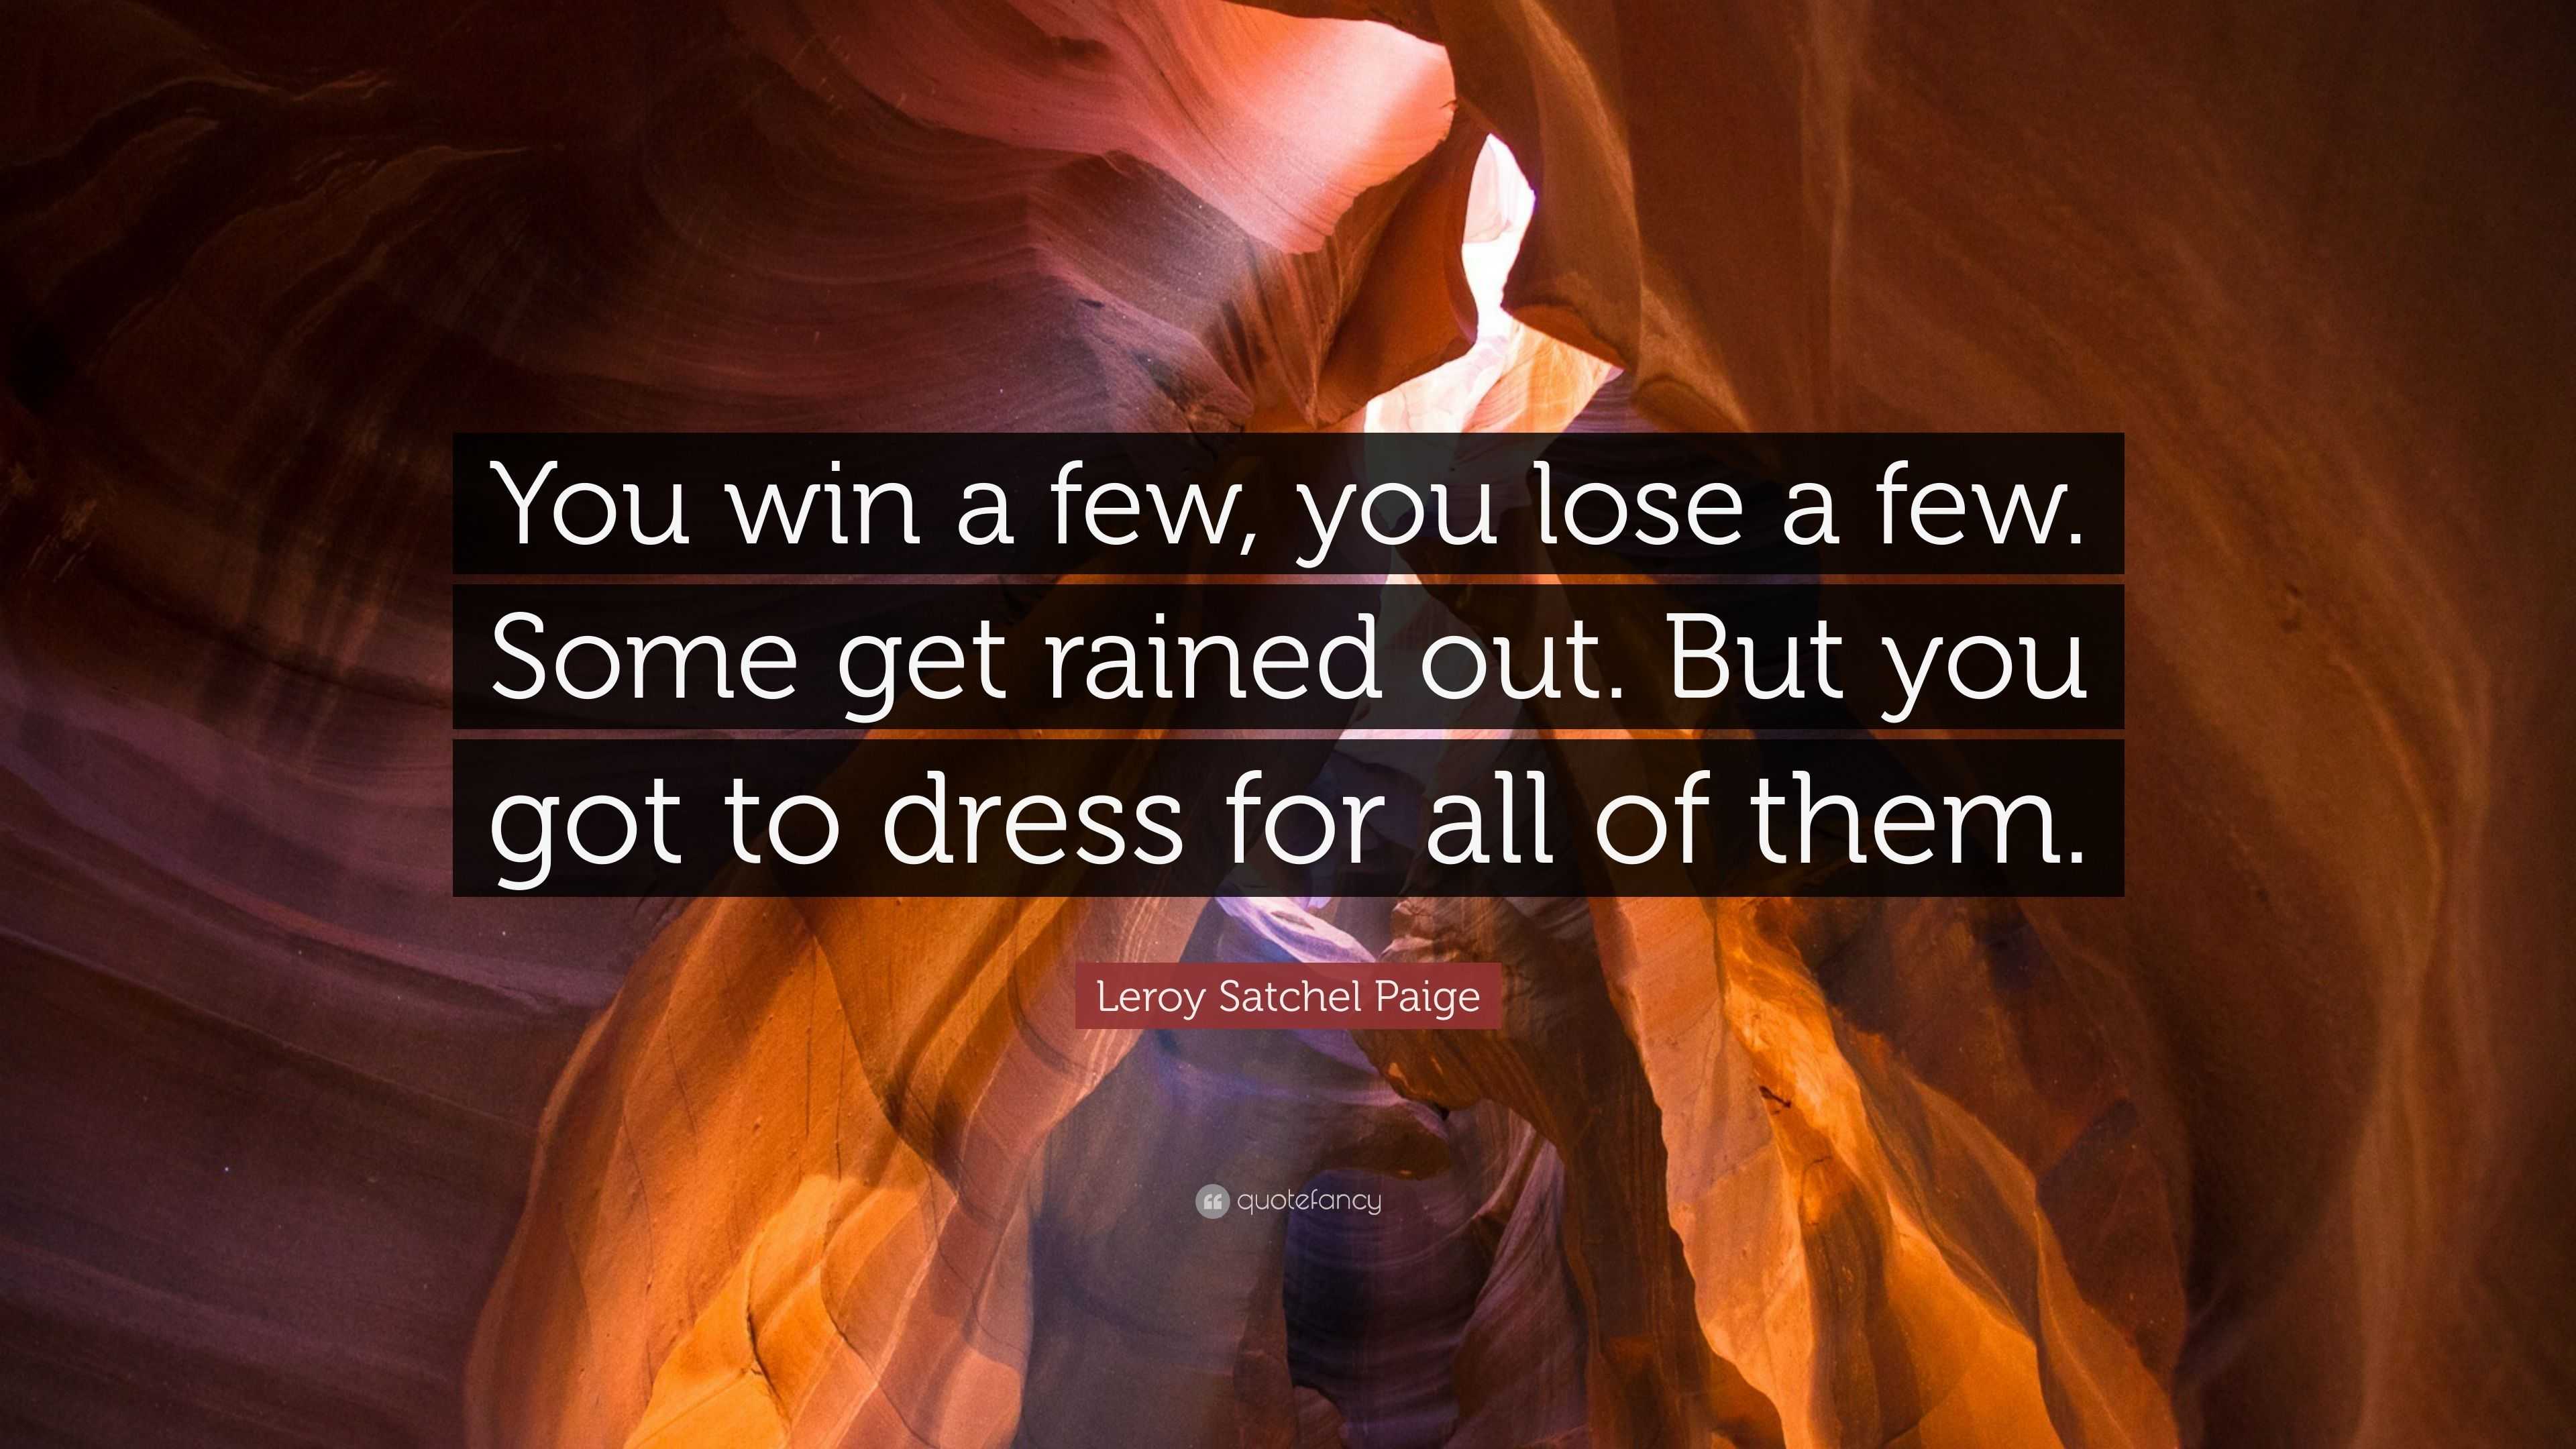 You Win a Few, You Lose a Few. Some Get Rained Out. But You Got to Dress  for All of Them